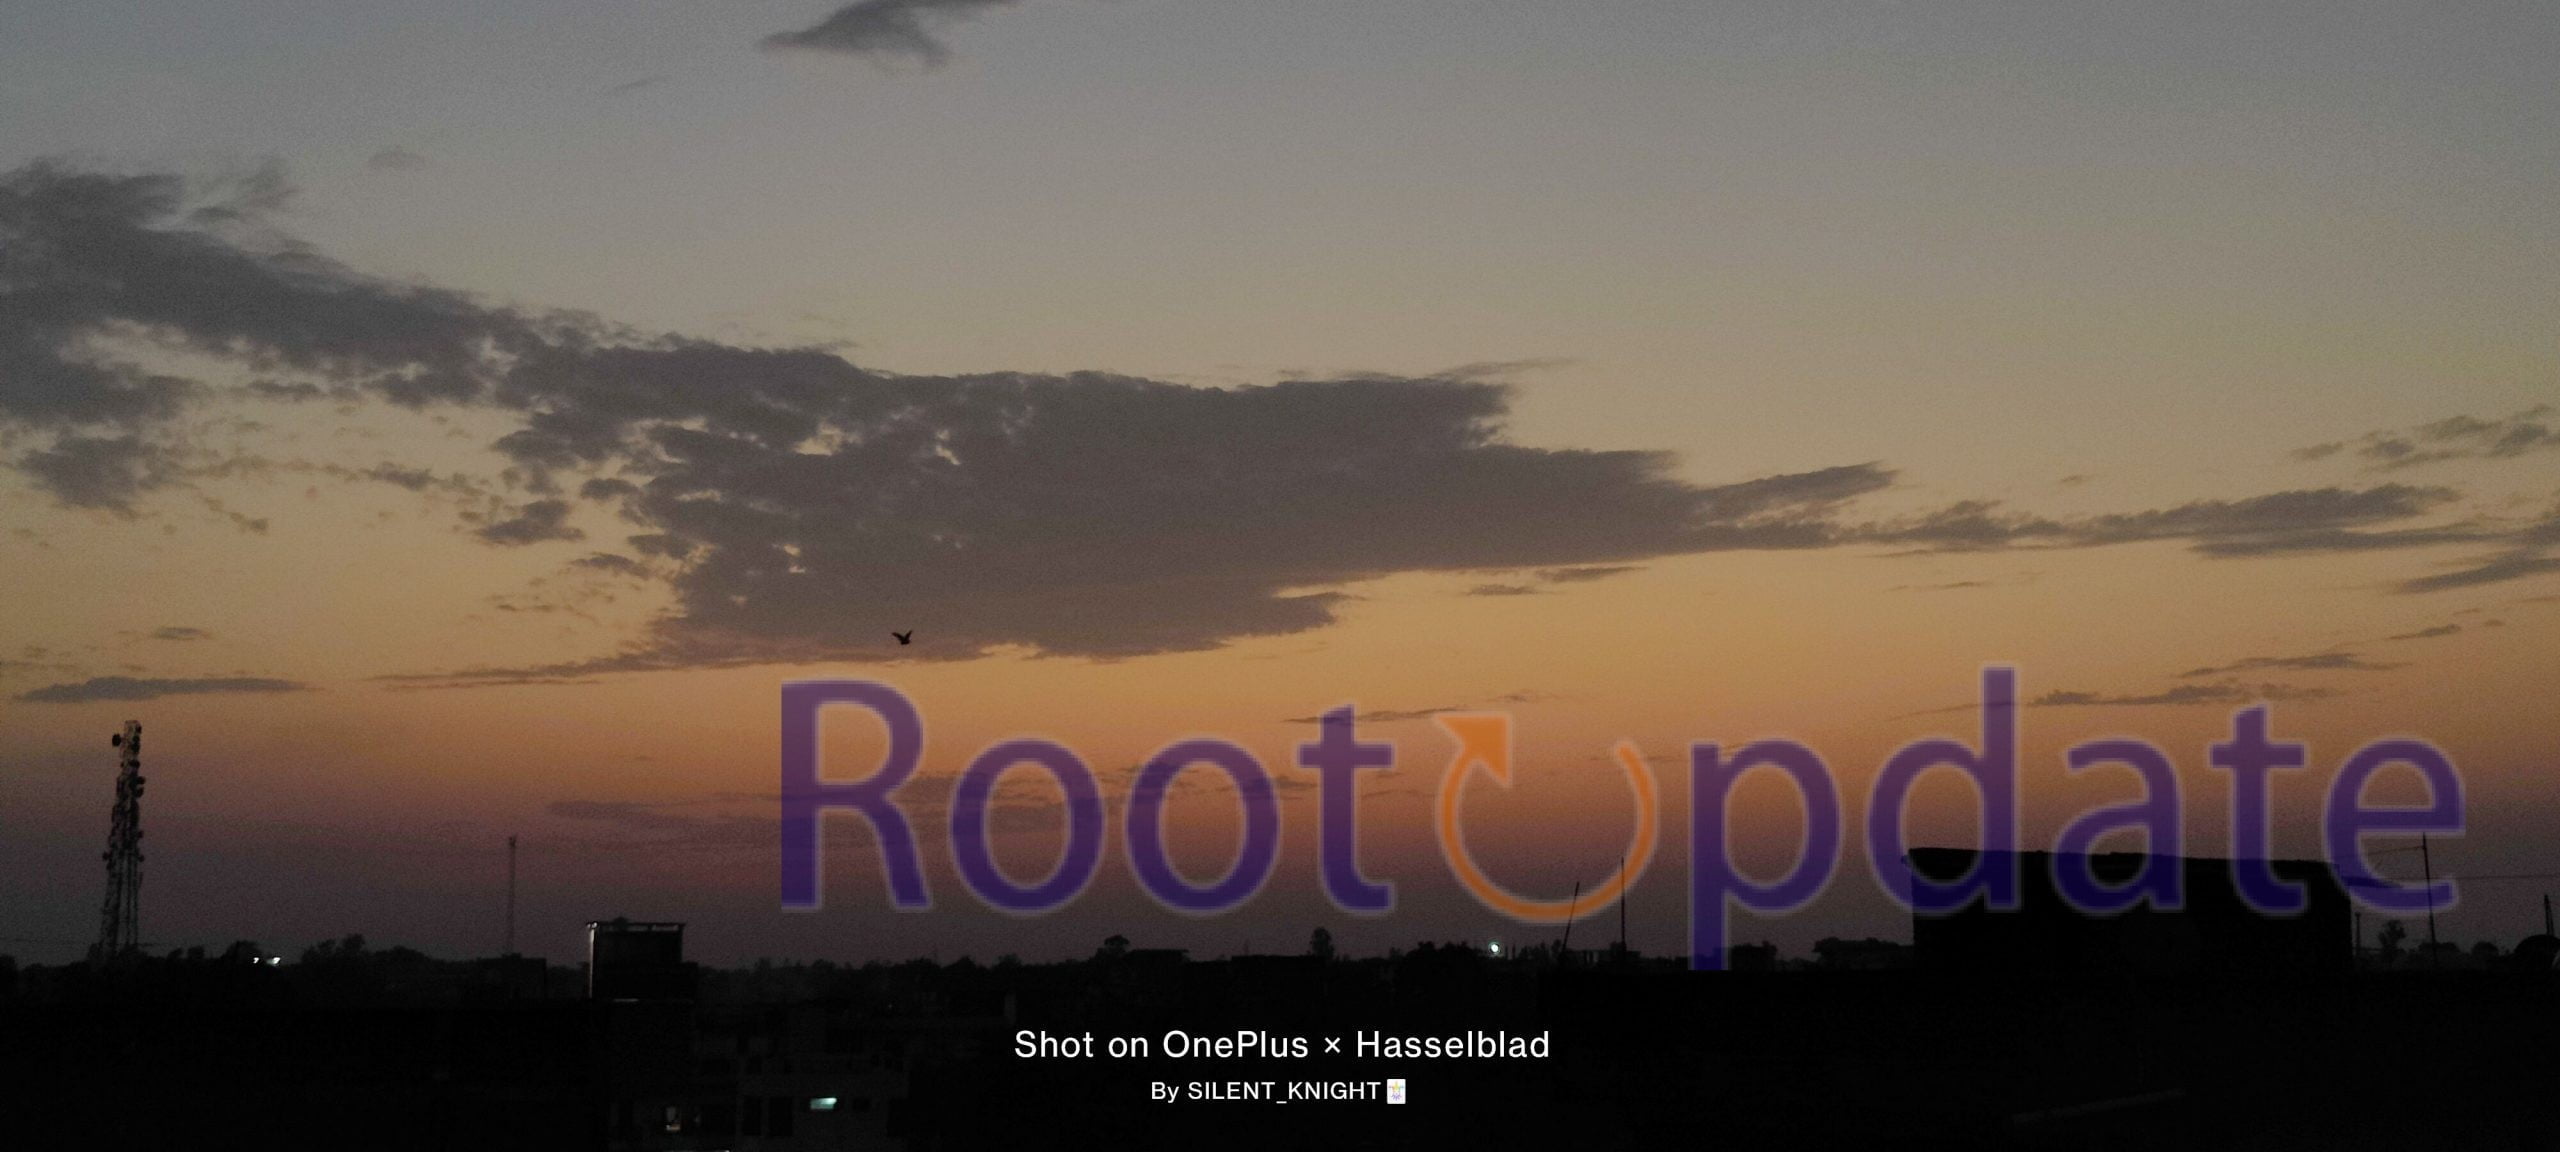 How To Add Shot On OnePlus Hasselblad Watermark To Any Photo